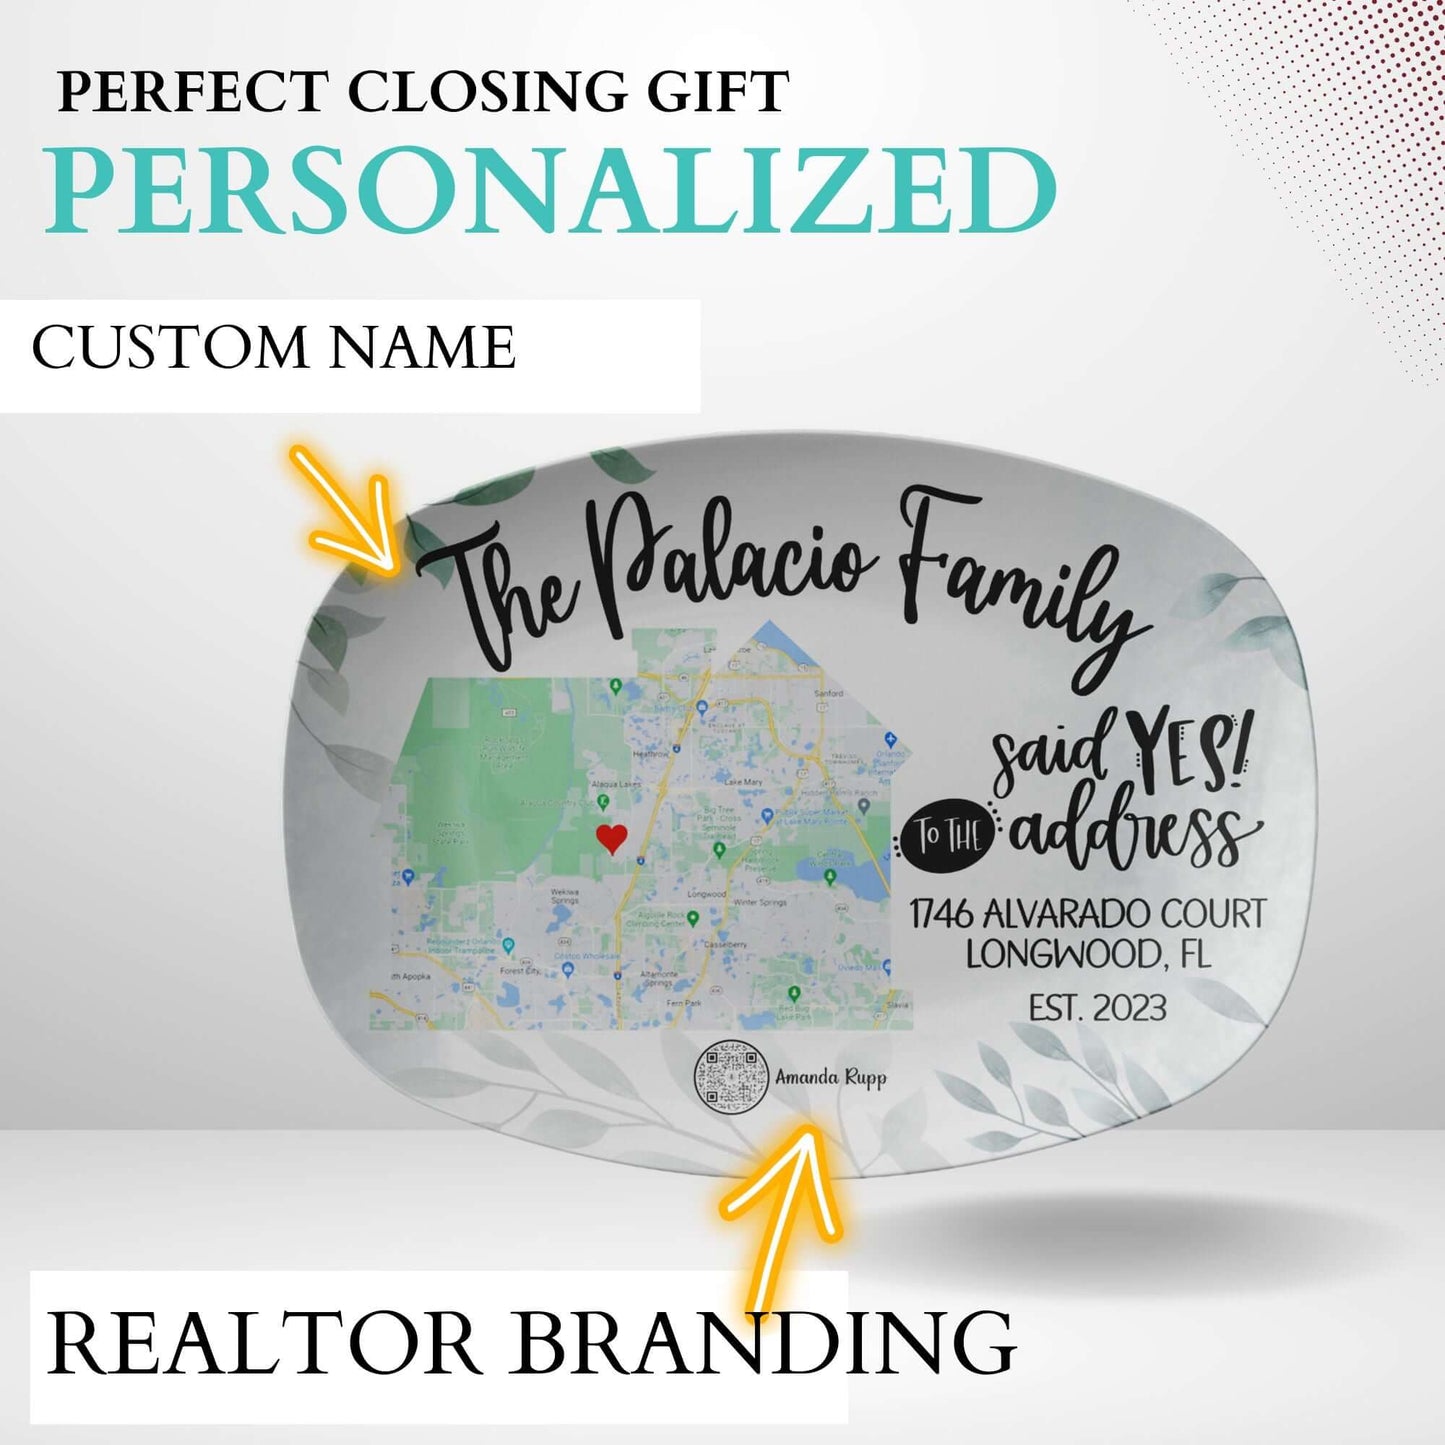 Personalized Custom Home Map New Home Platter Gift